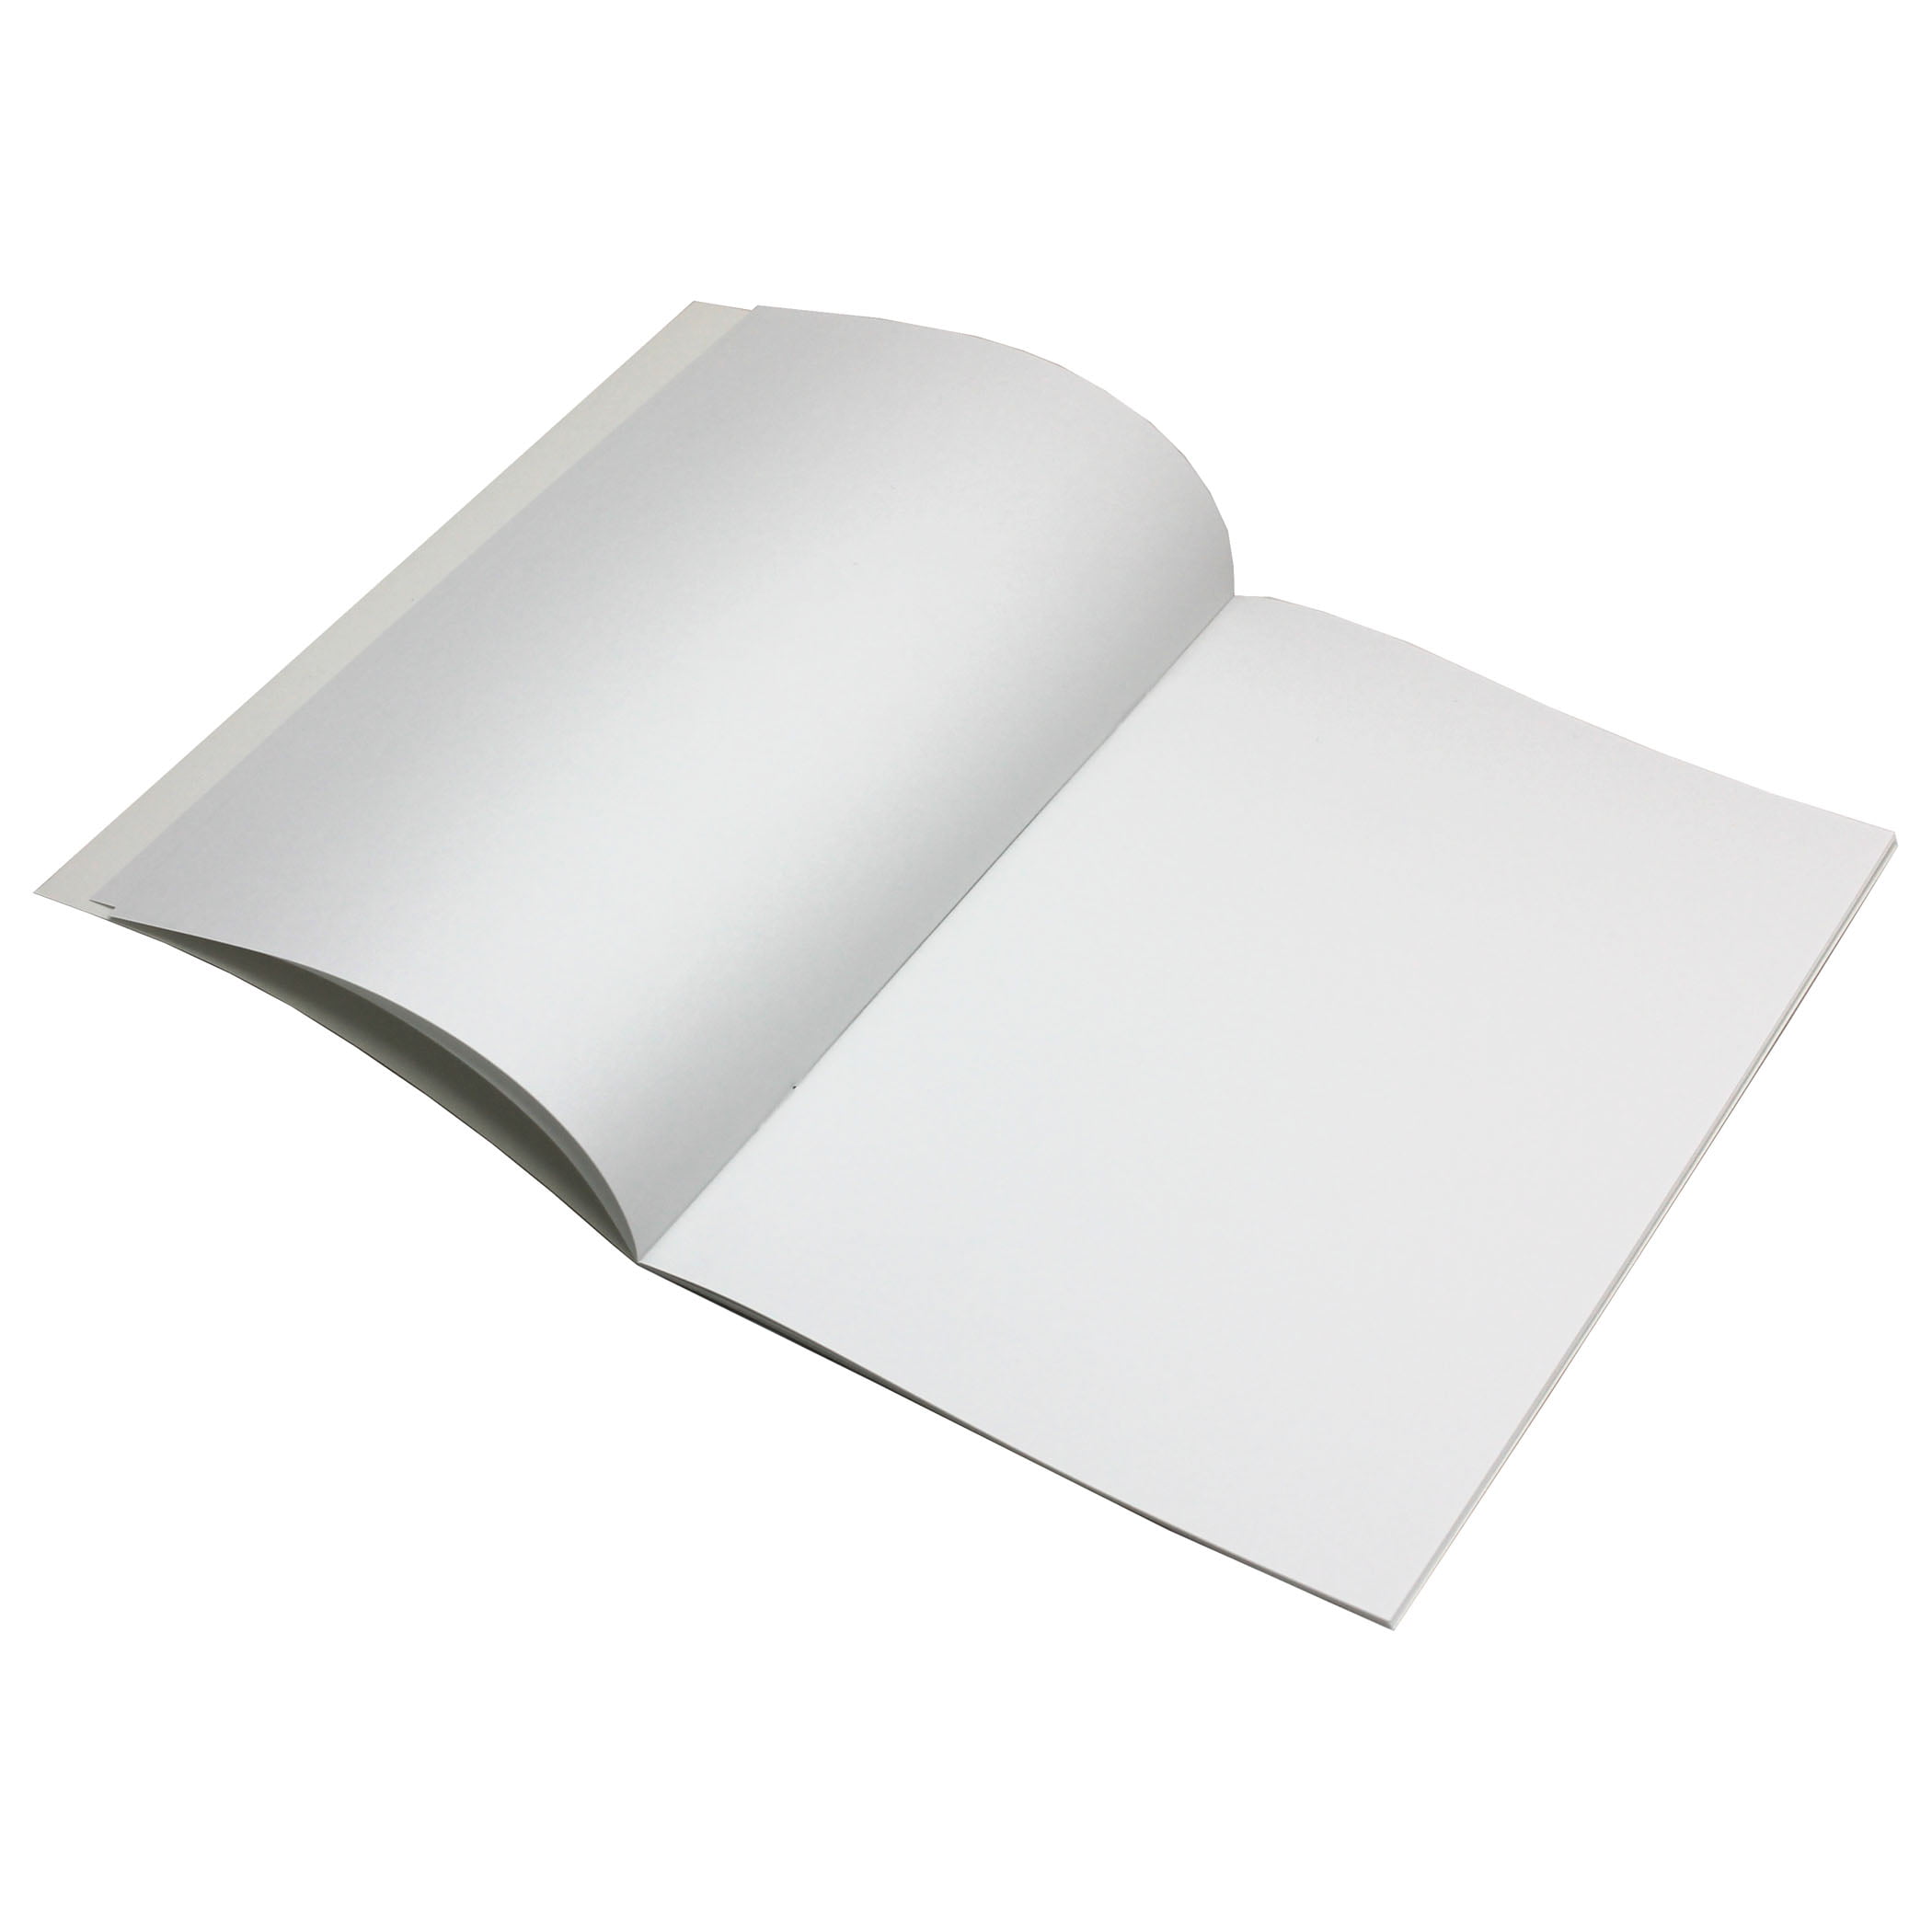 Rectangle Blank Book, 16-pages, Pack of 24 Books